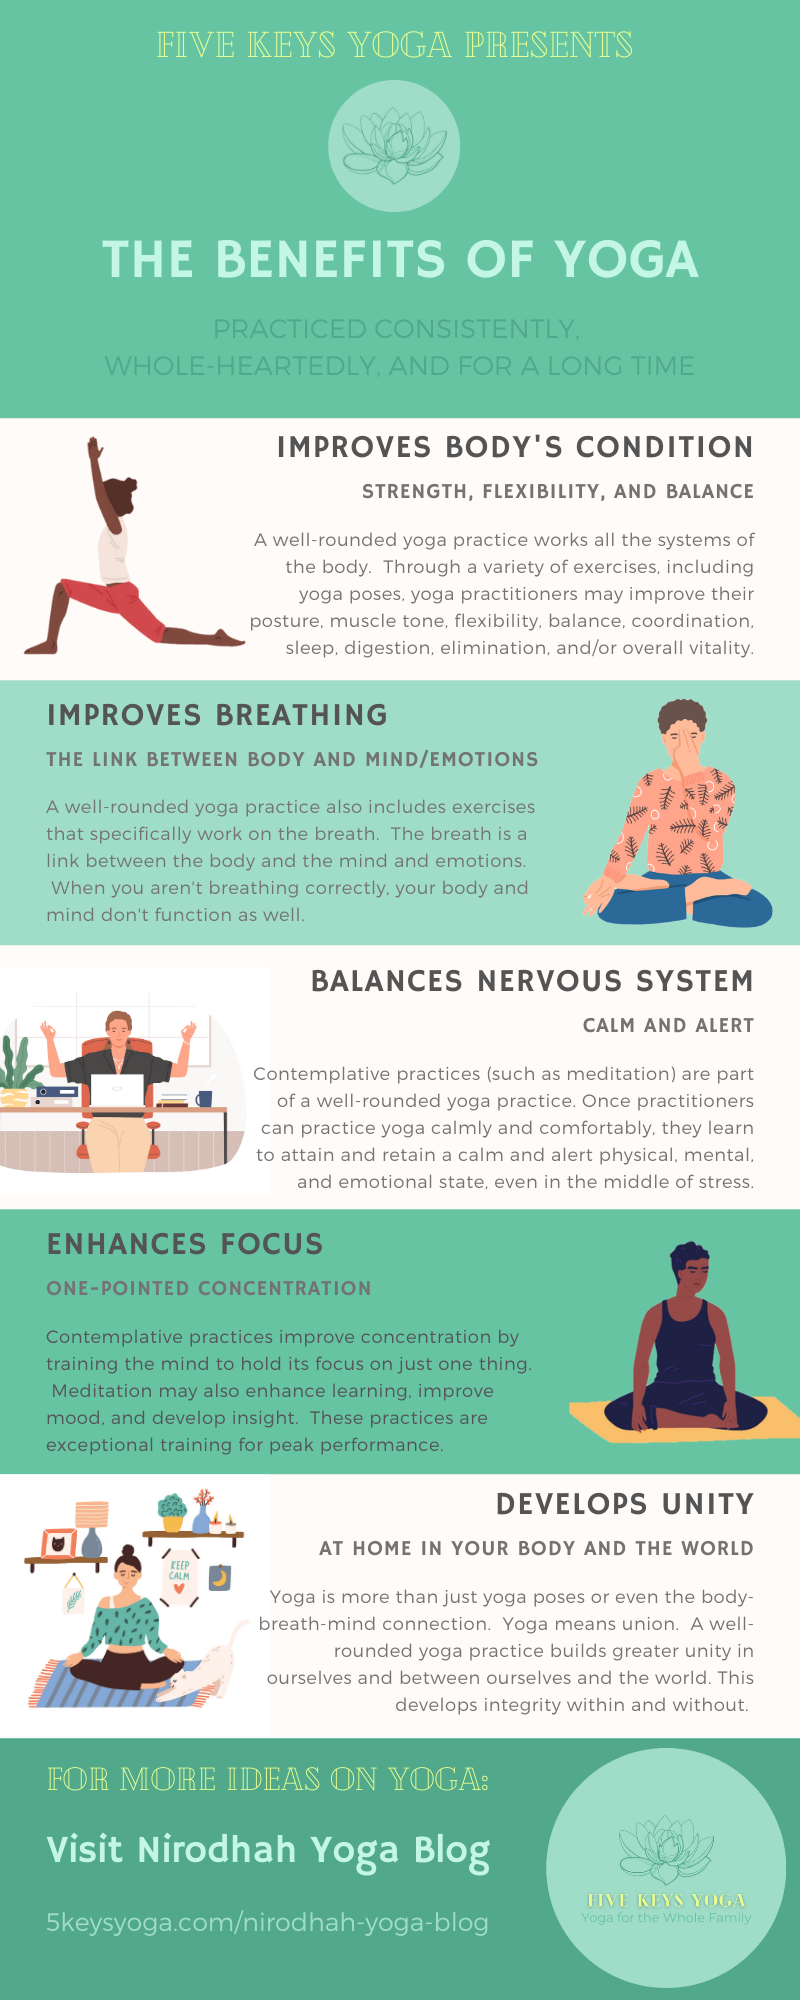 International Yoga Day: Practice Asanas Daily For A Healthy Life